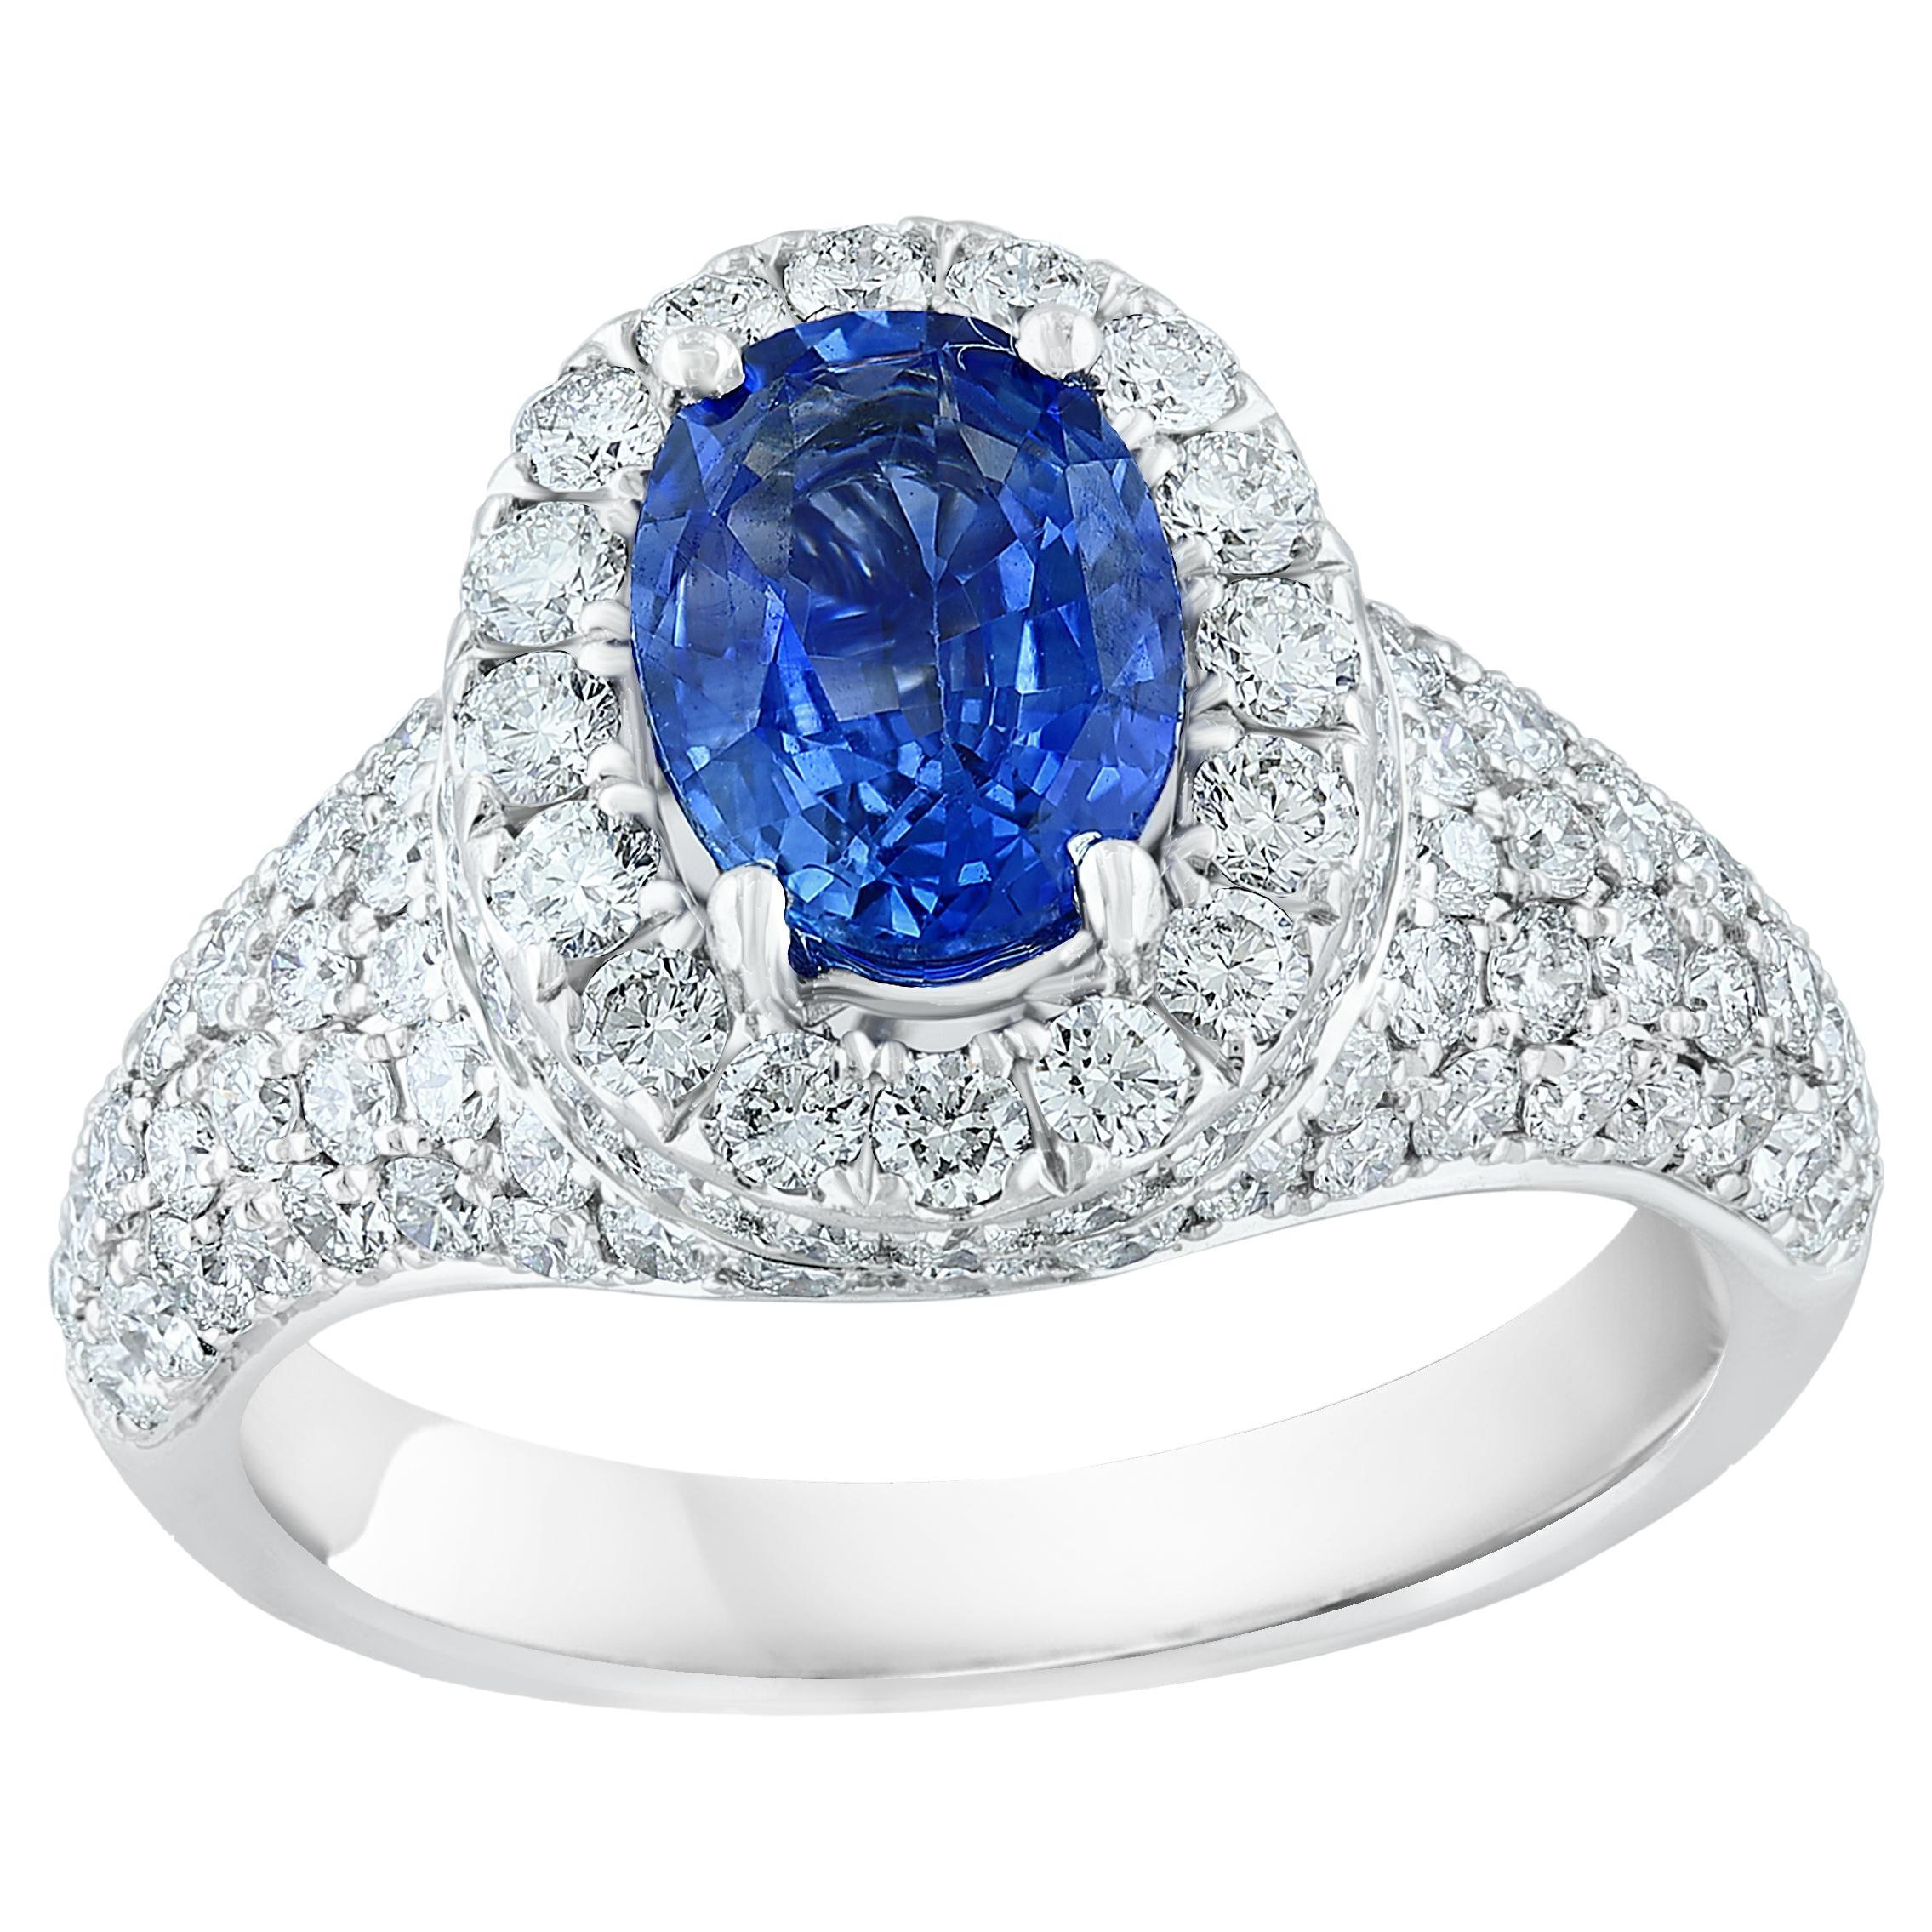 1.27 Carat Oval Cut Blue Sapphire and Diamond Fashion Ring in 18K White Gold For Sale